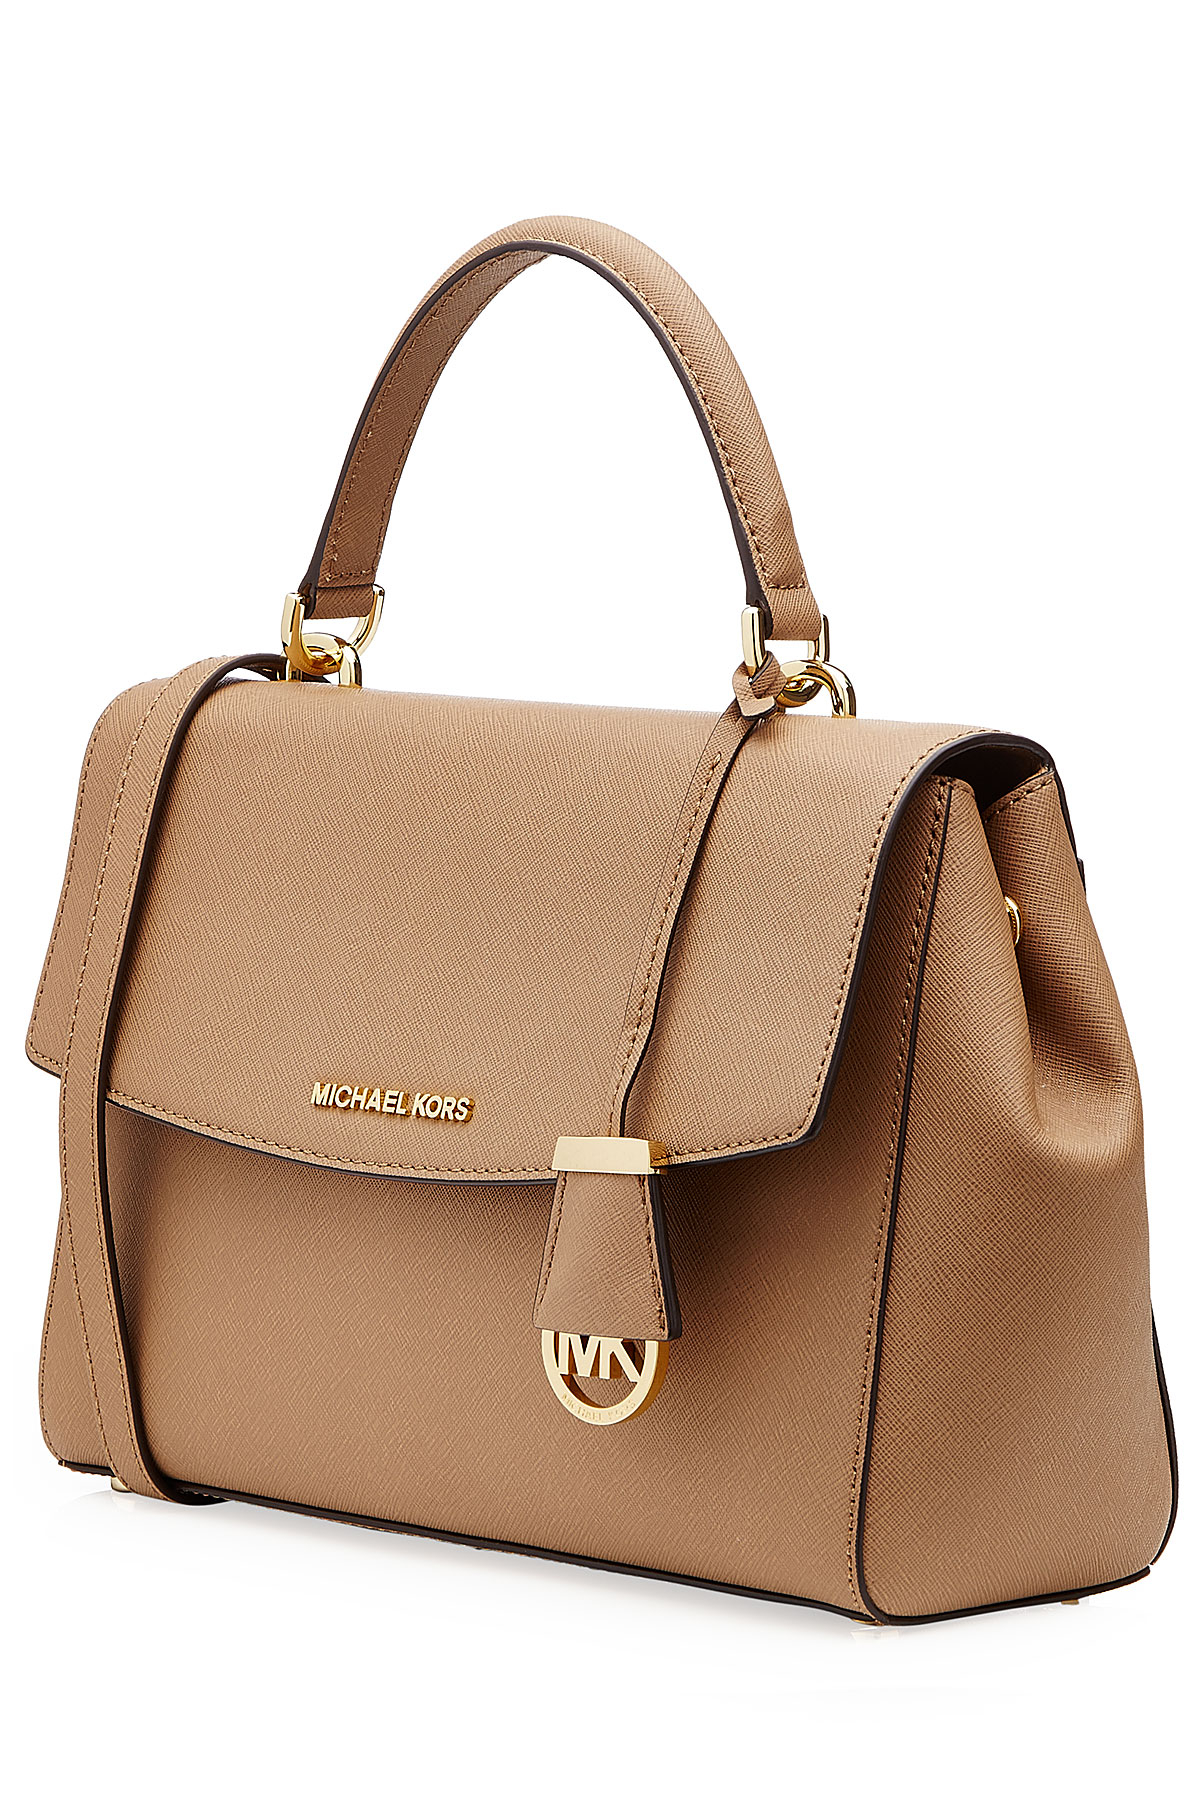 Lyst - Michael Michael Kors Michael Michael Kors Ava Small Leather Tote ...